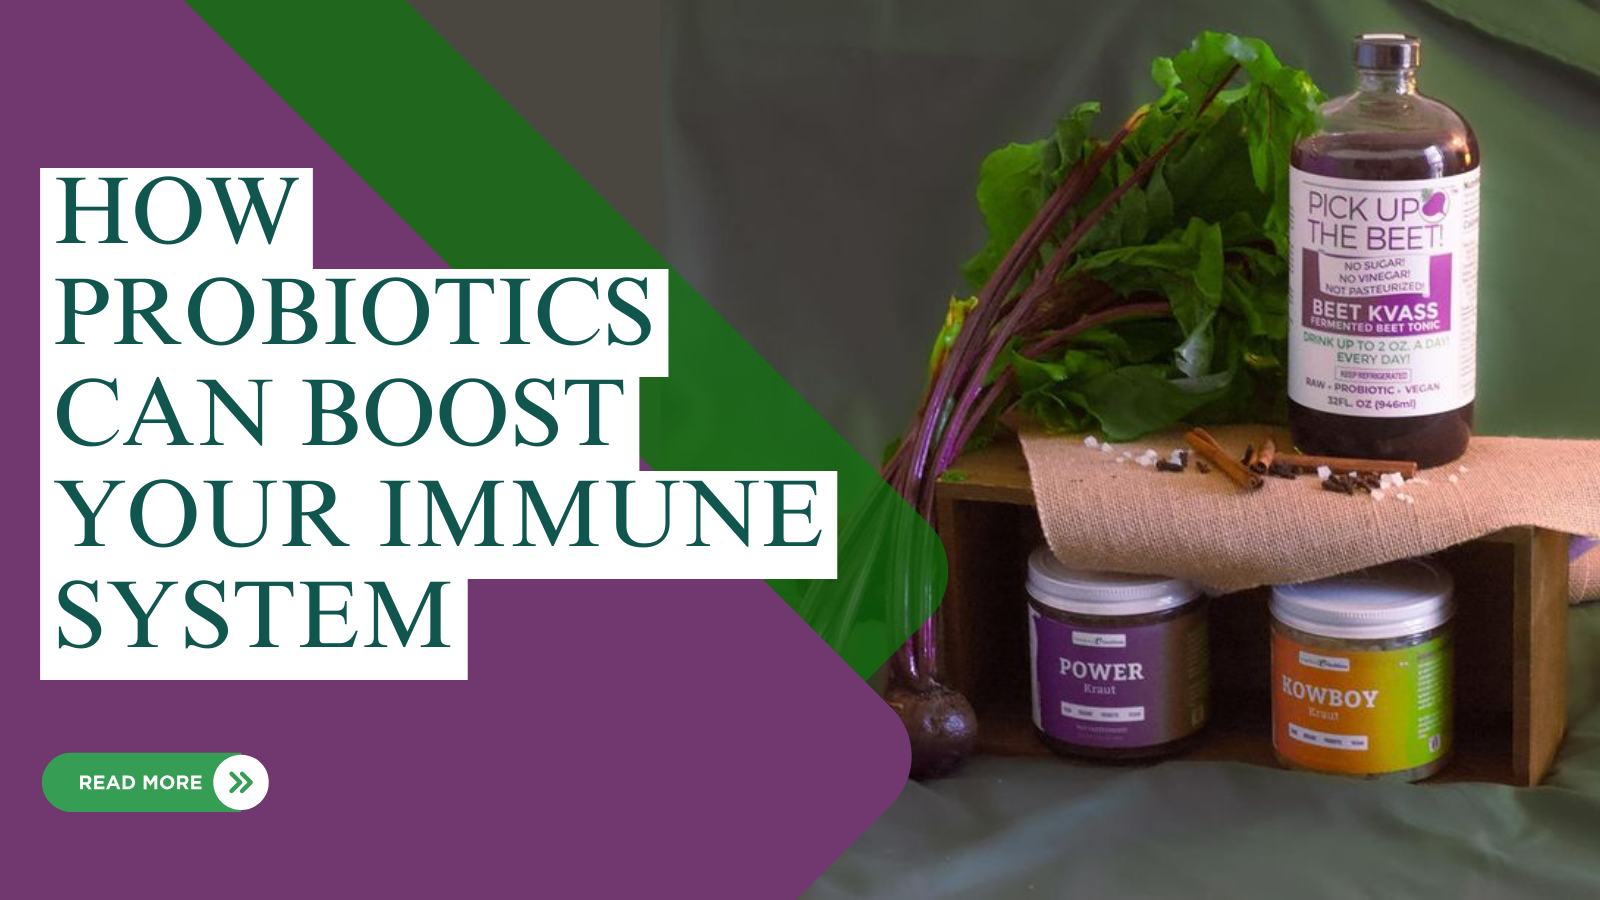 How Probiotics Can Boost Your Immune System